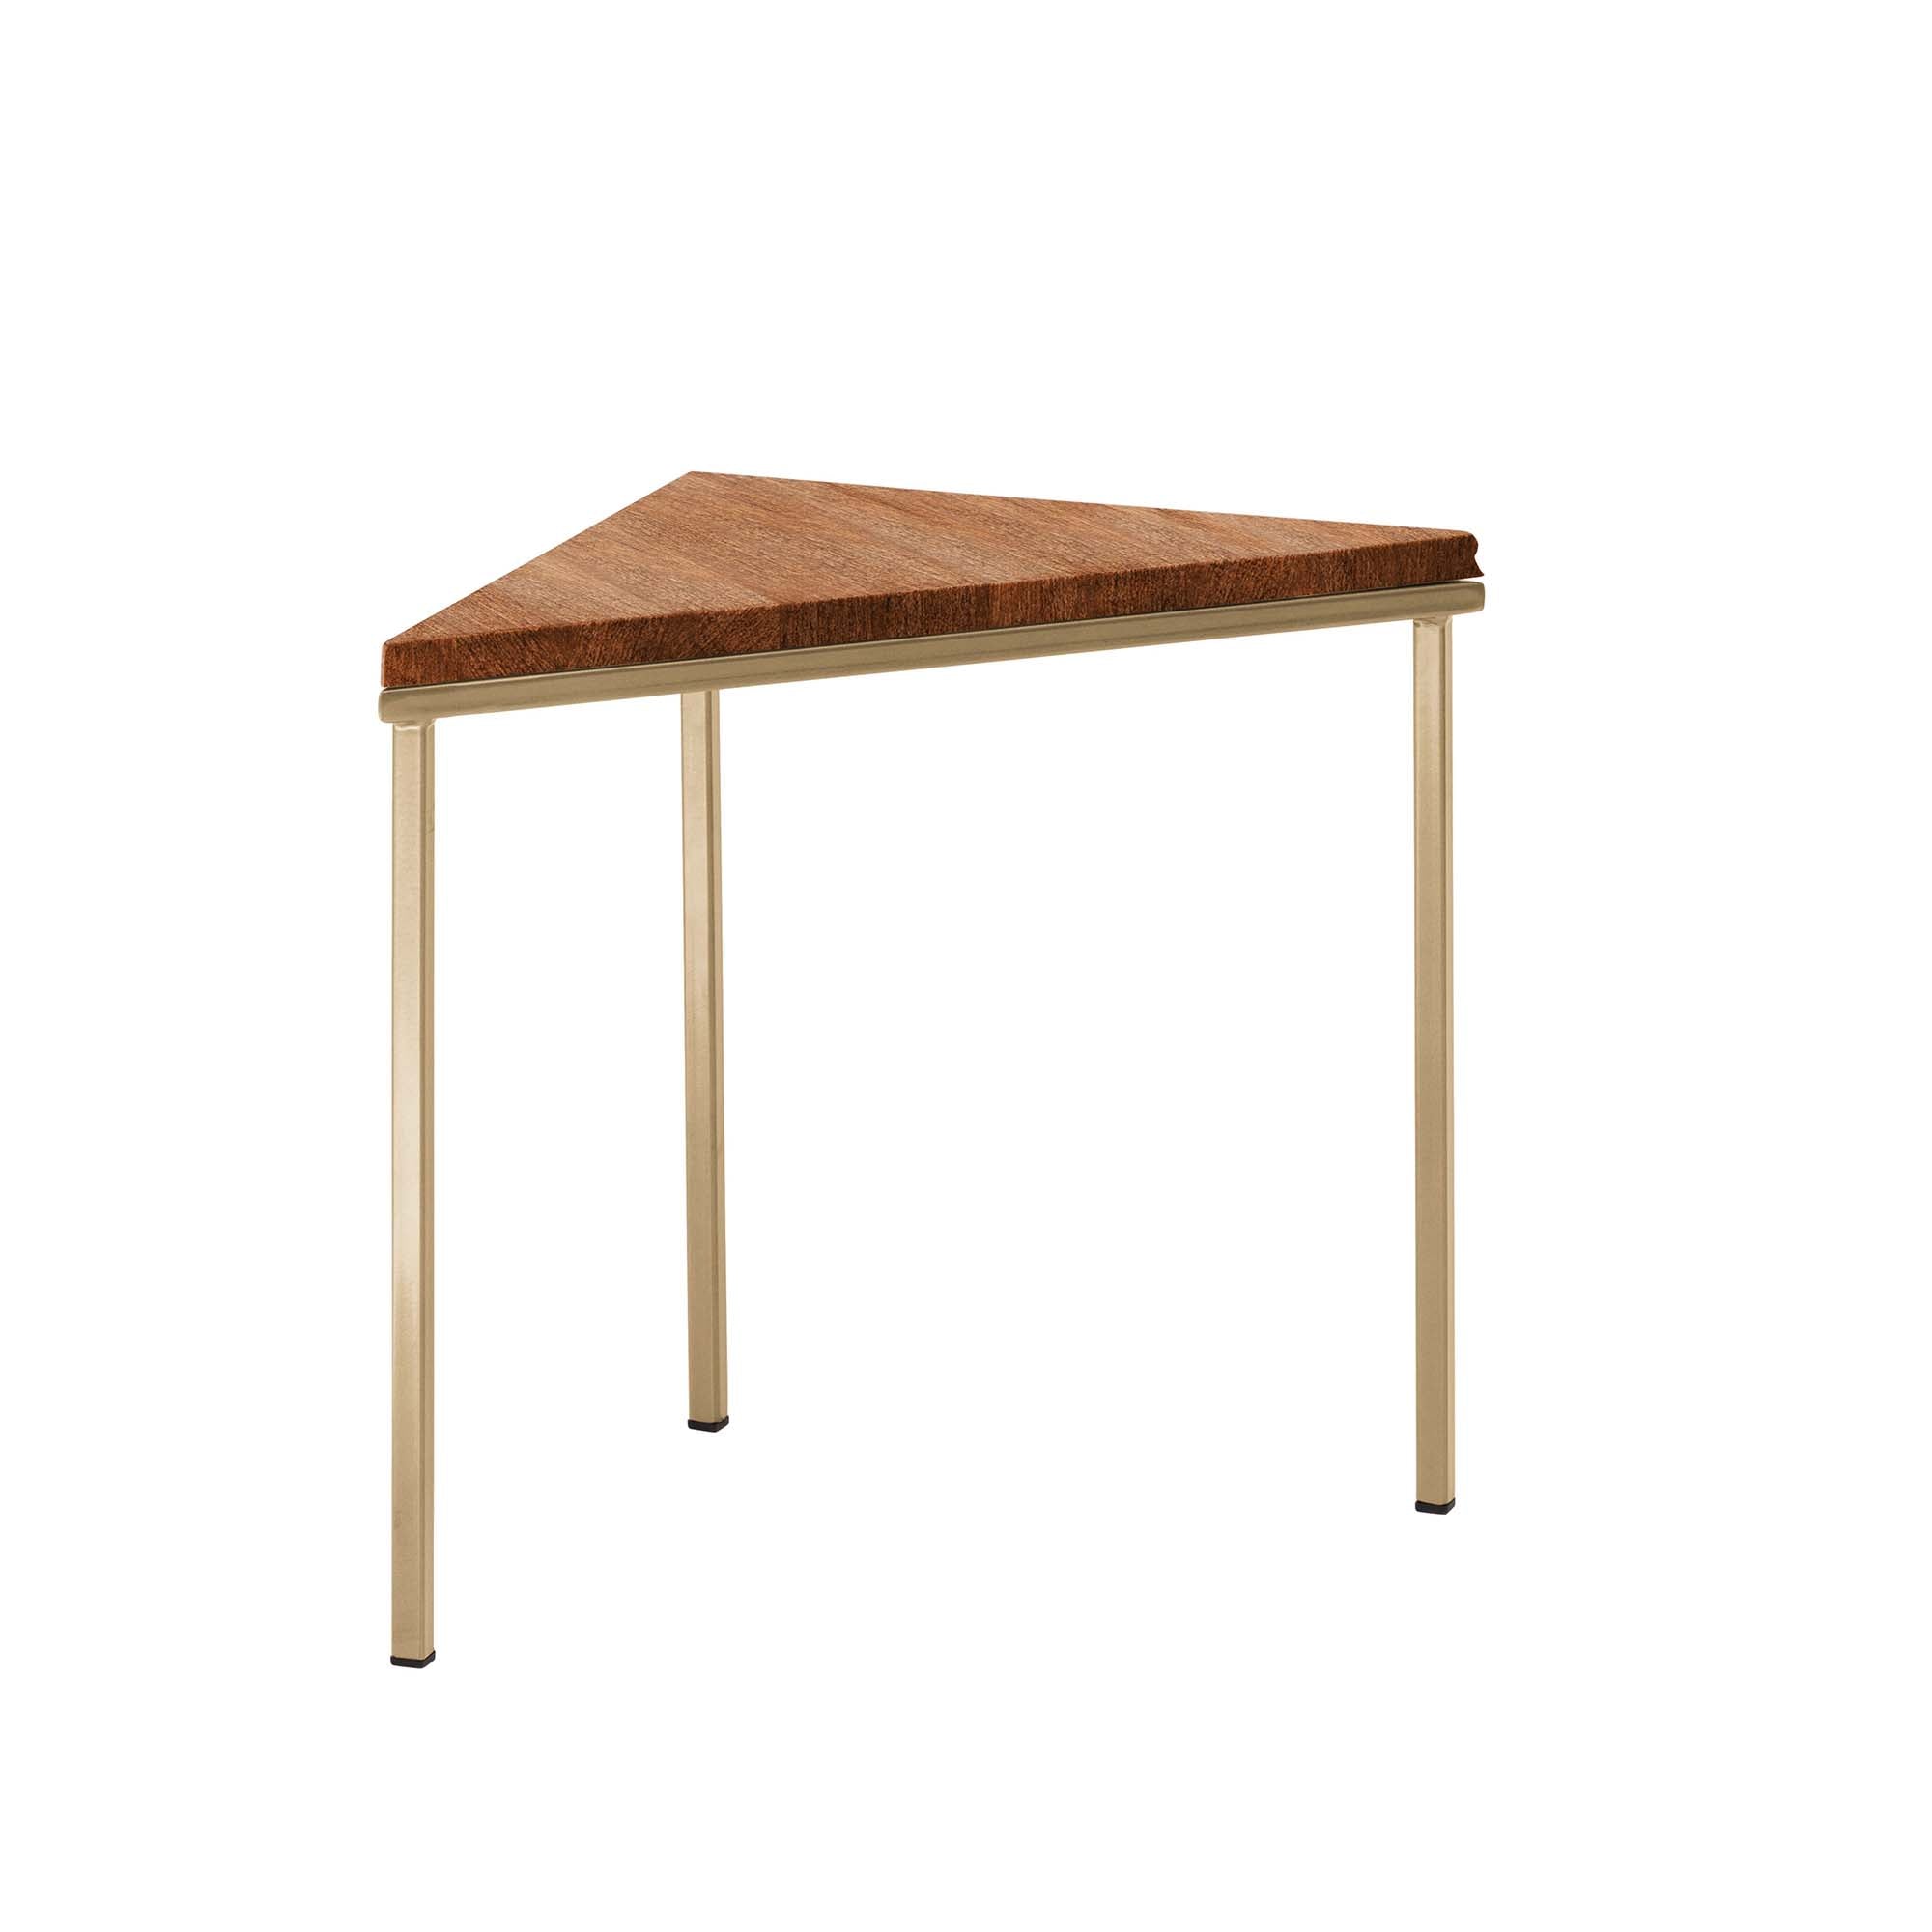 Tripod Table, Beech Wood, Walnut Colour yellow frame, front view